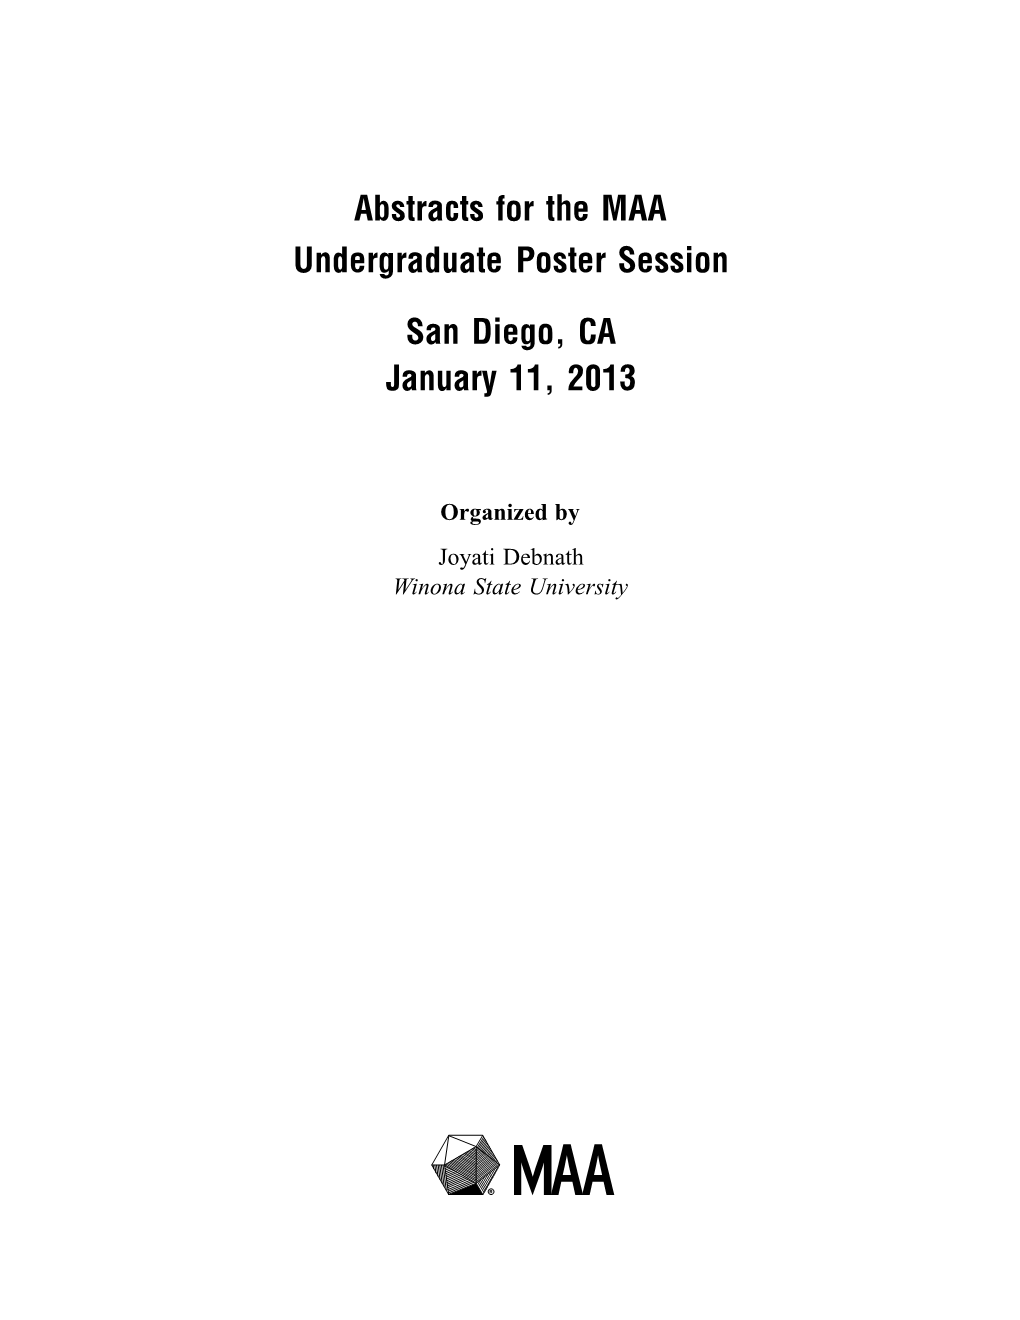 Abstracts for the MAA Undergraduate Poster Session San Diego, CA January 11, 2013